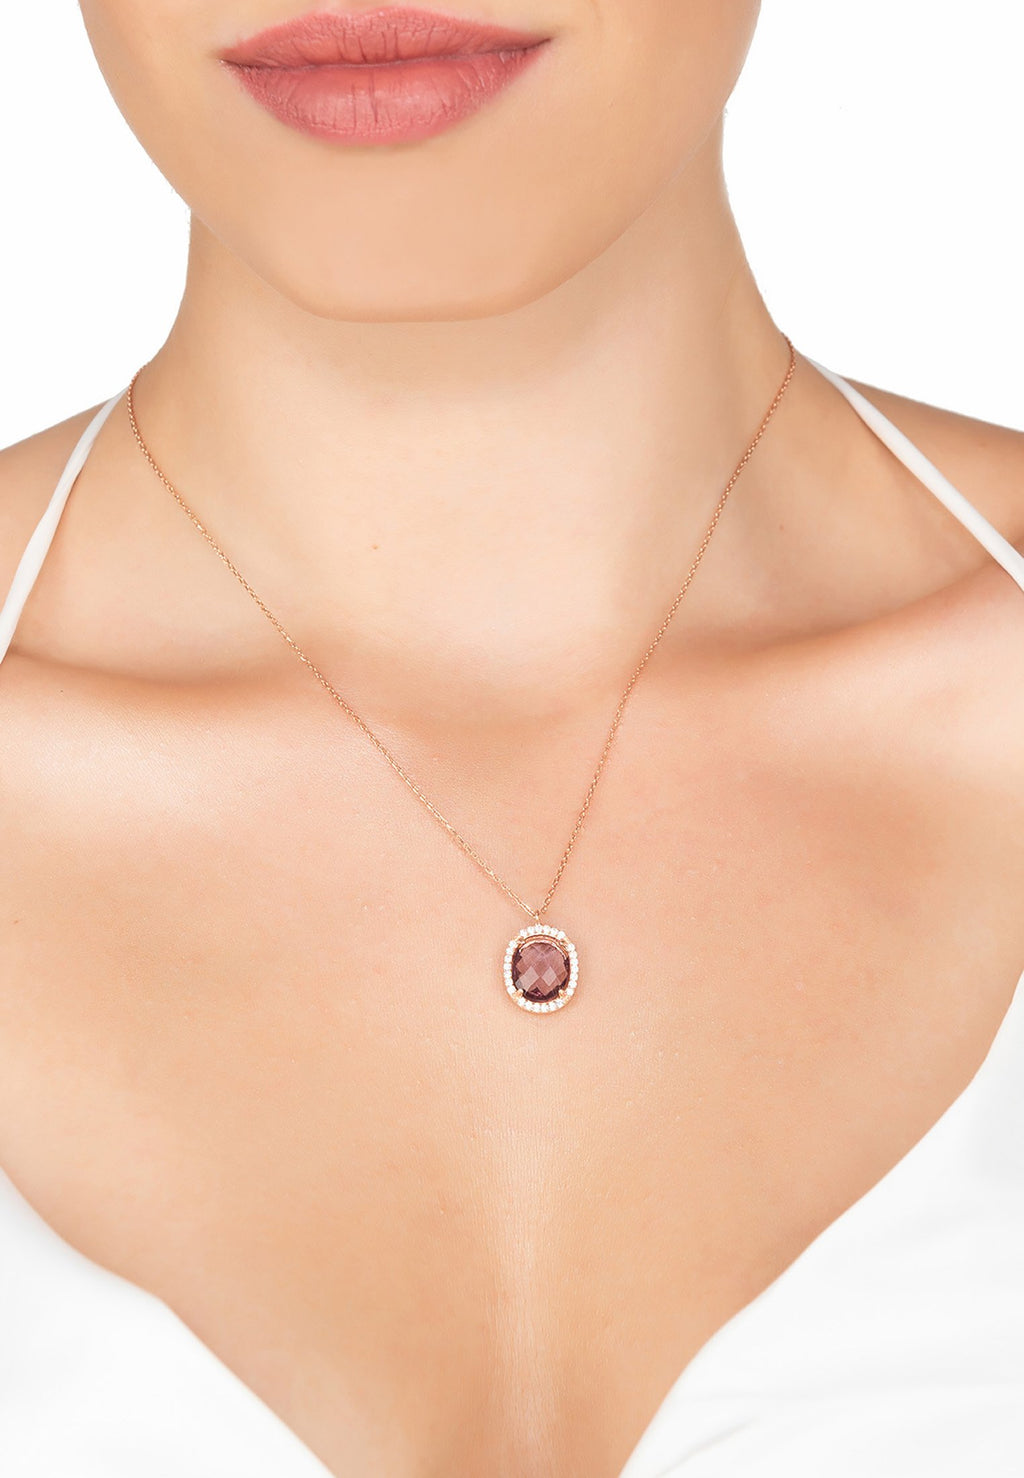 Beatrice Oval Gemstone Pendant Necklace Rose Gold Amethyst Hydro